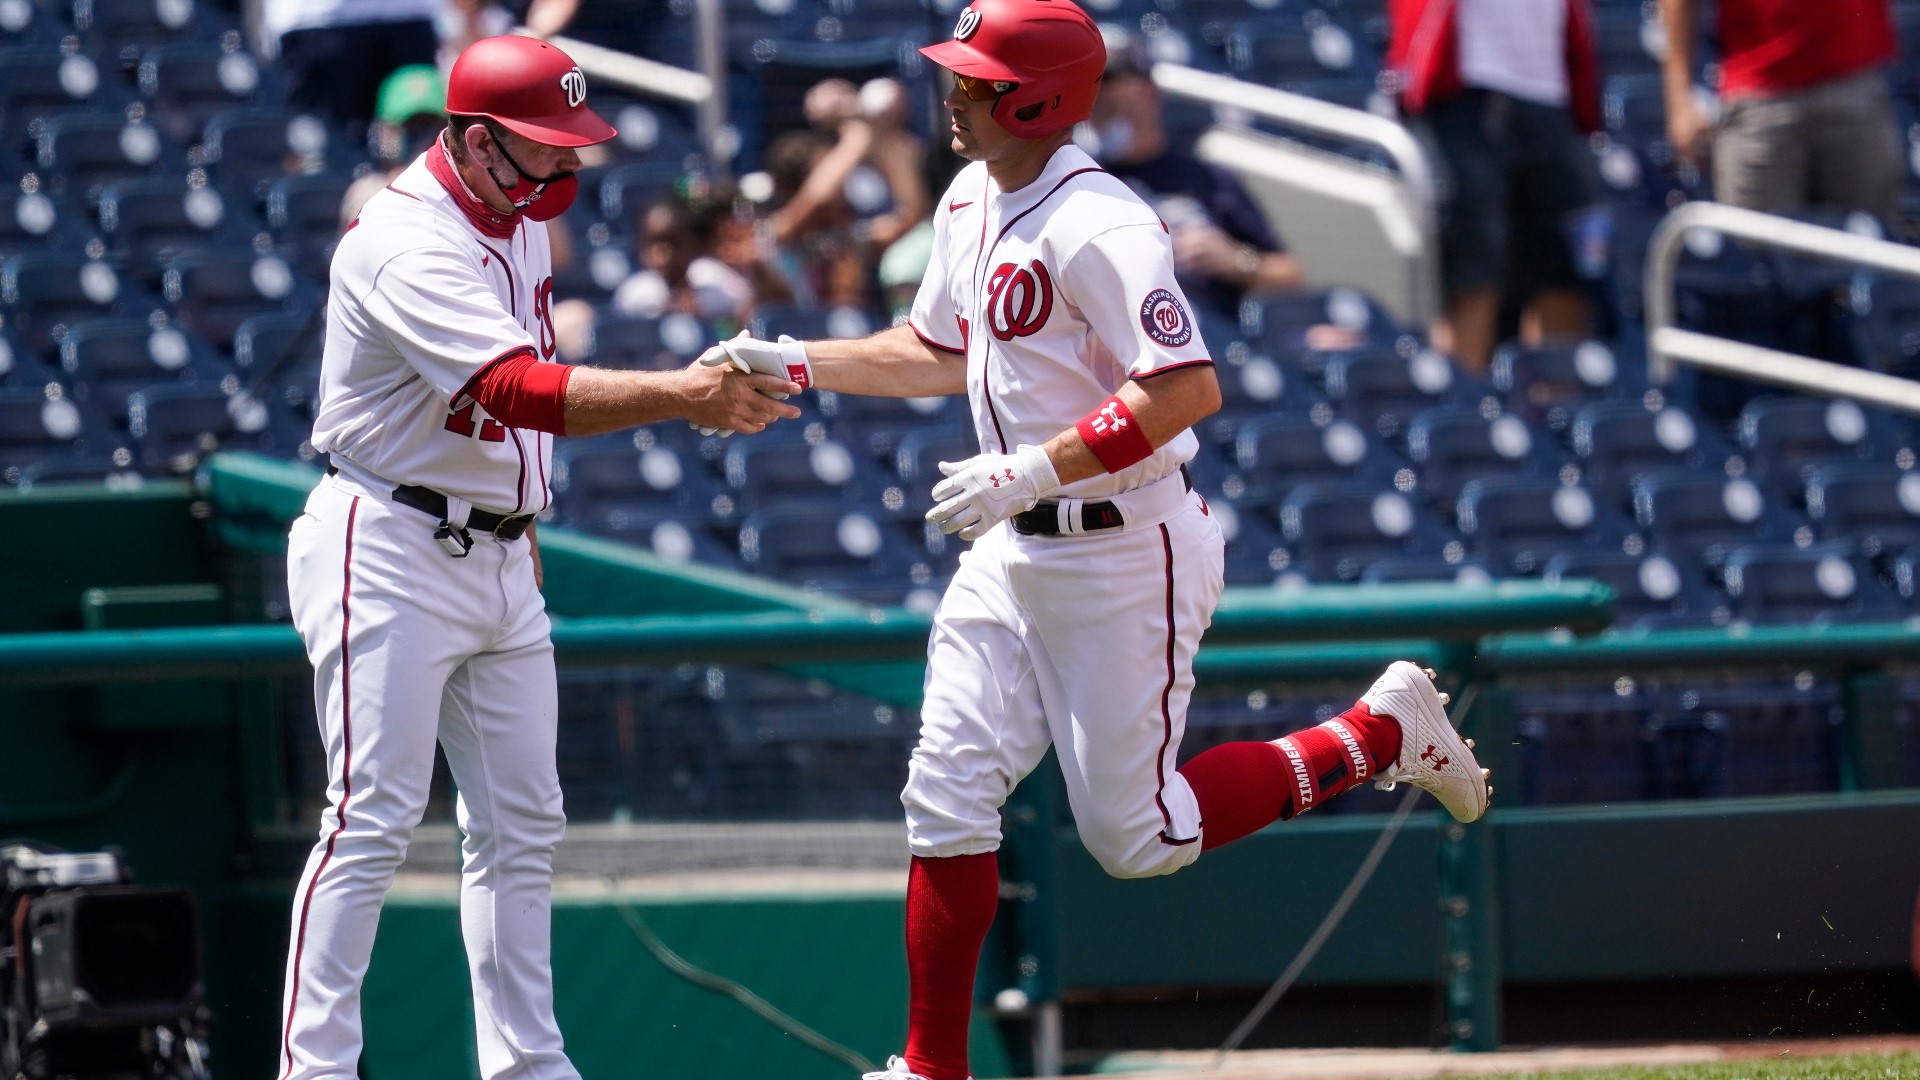 The Nationals will take on the Phillies this week after losing its last two series against the Yankees and Braves last week and weekend.